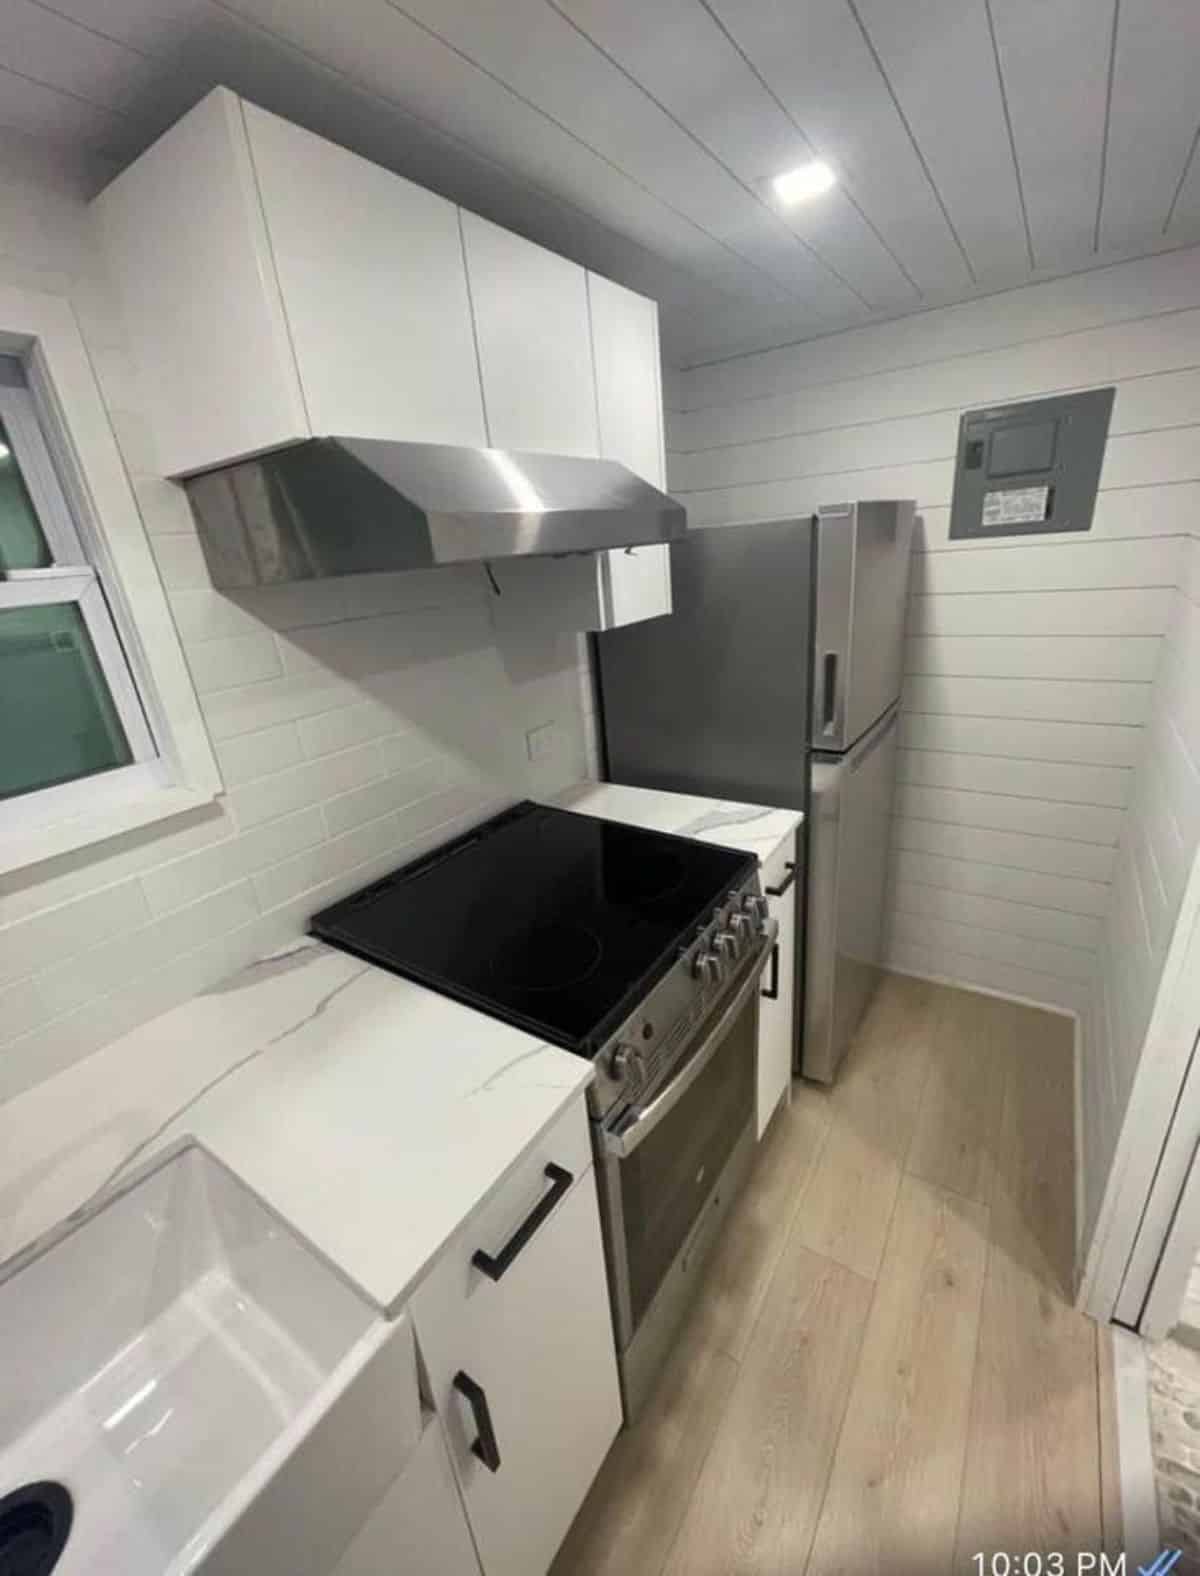 Kitchen area of Luxurious Tiny Home has a stove, oven, refrigerator and chimney